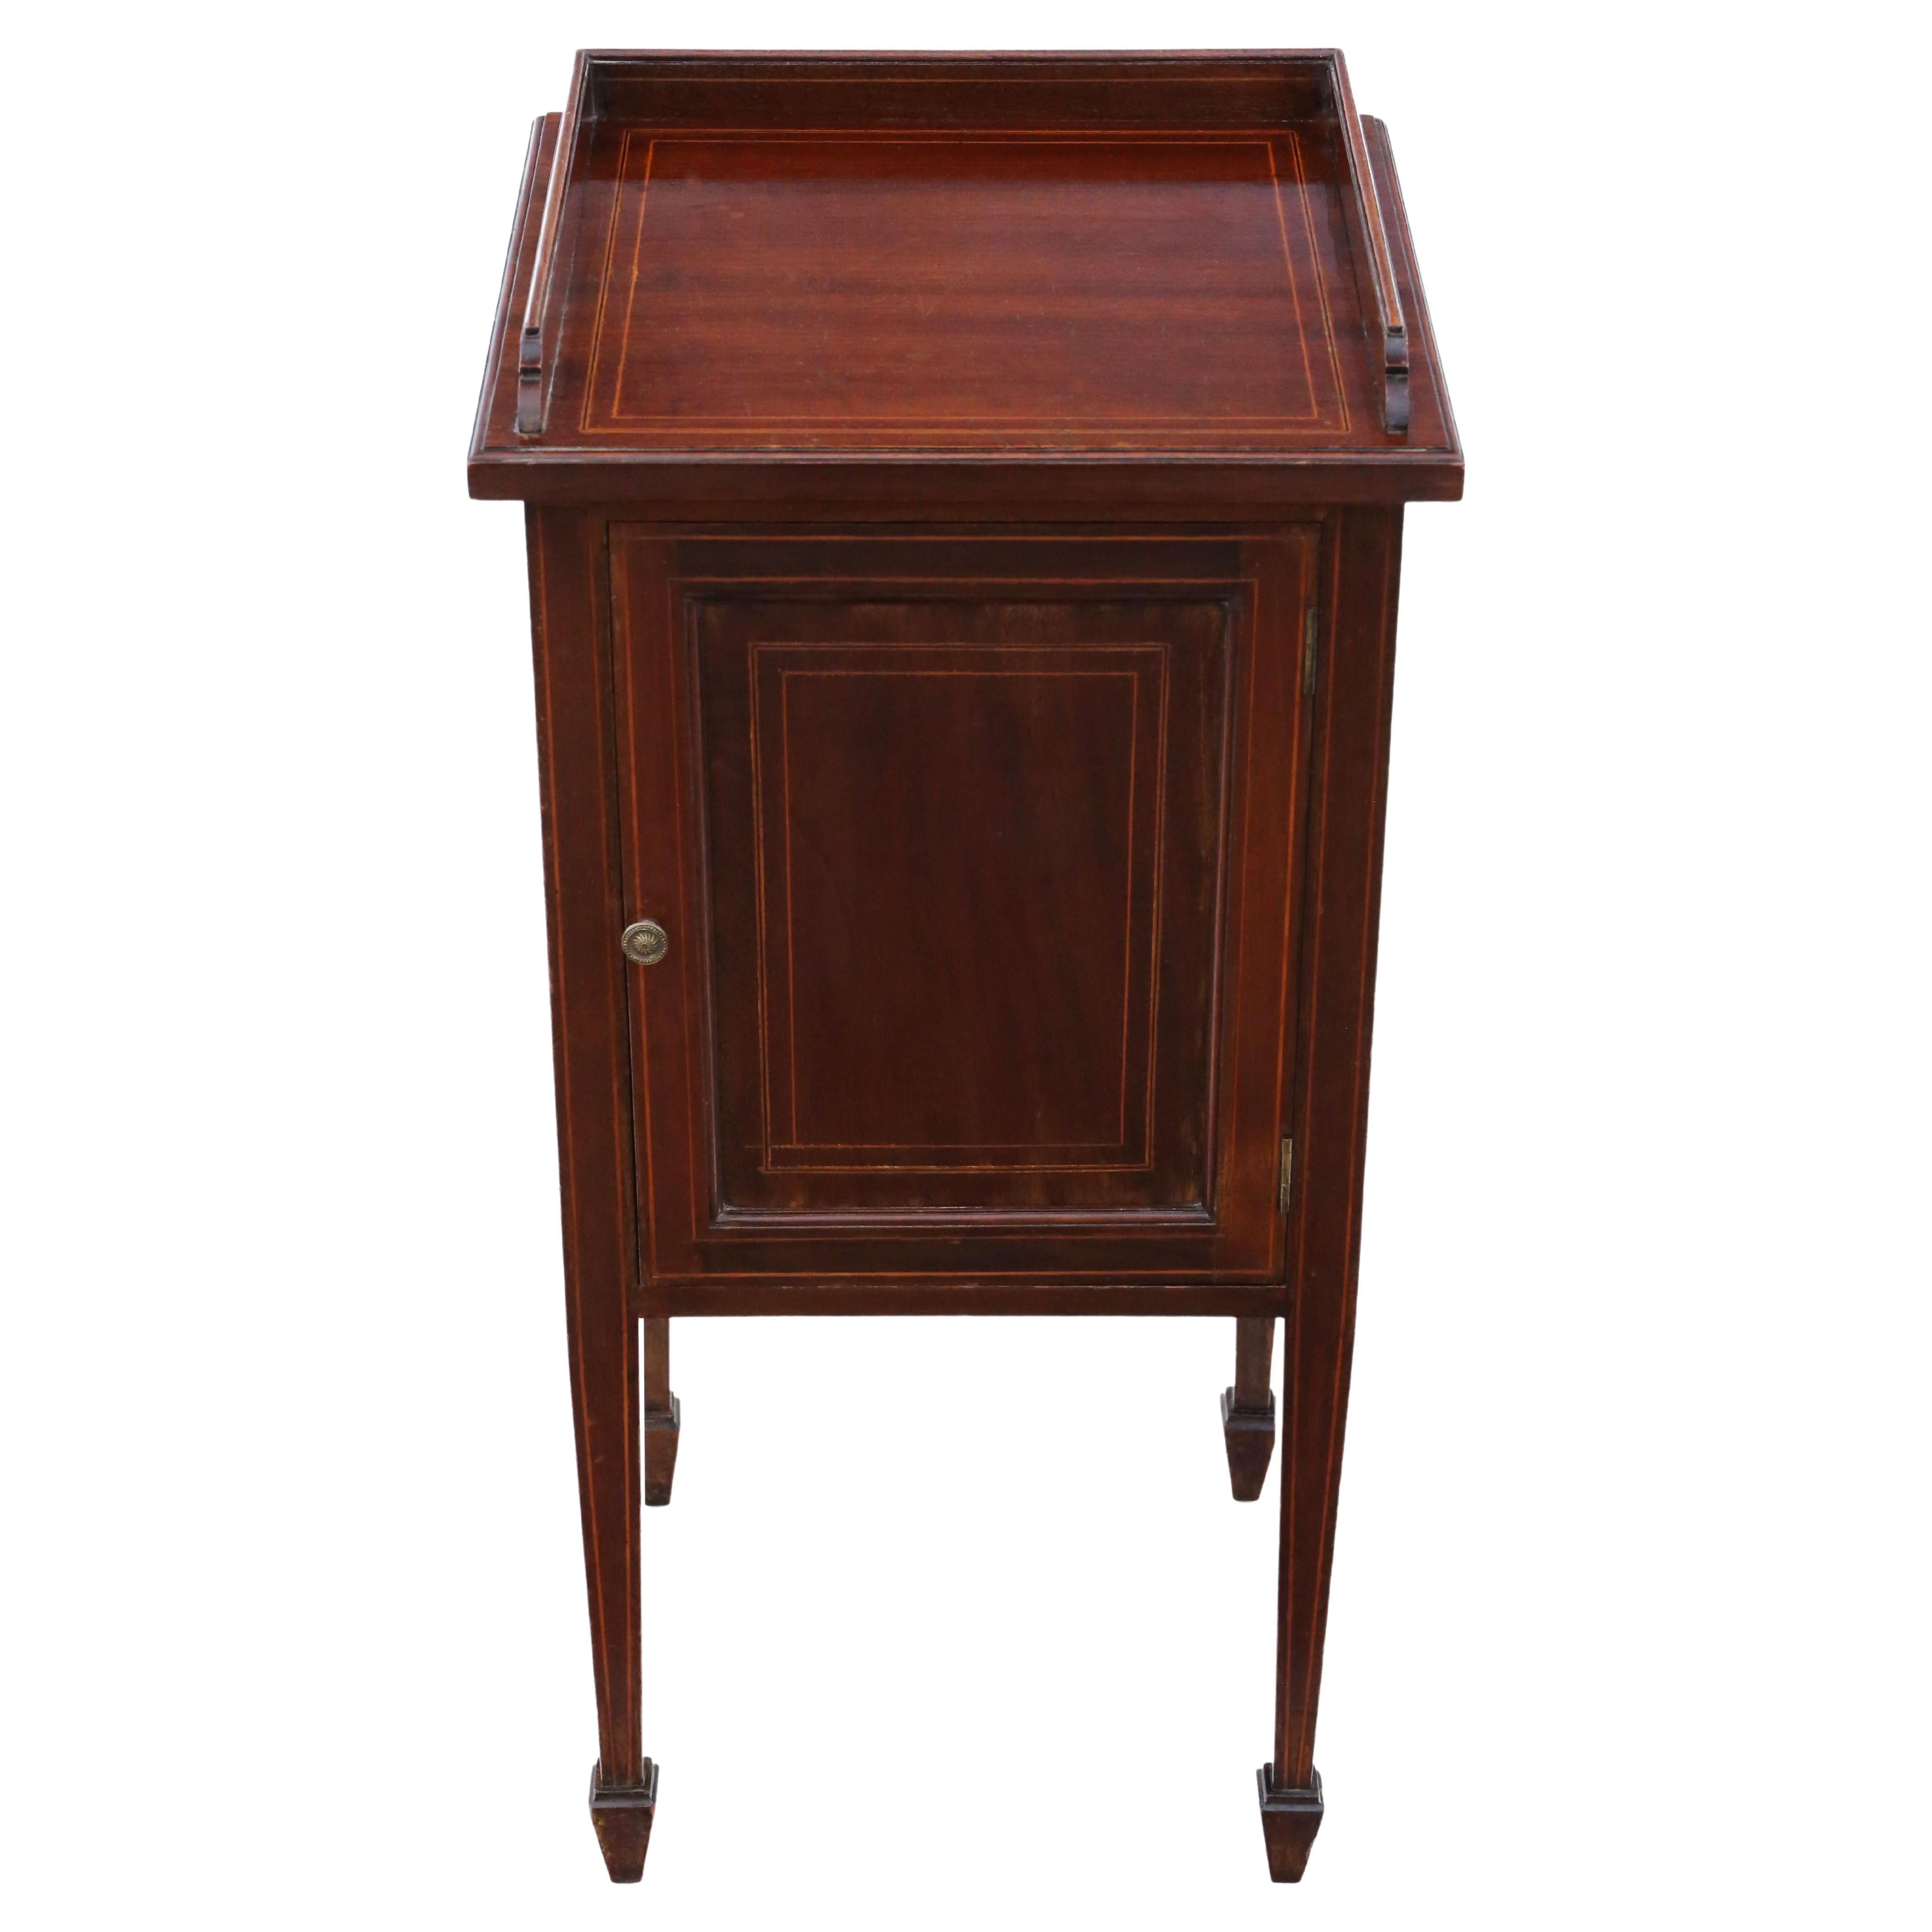 Antique Fine Quality Tray Top Inlaid Mahogany Bedside Table Cupboard, circa 1905 For Sale